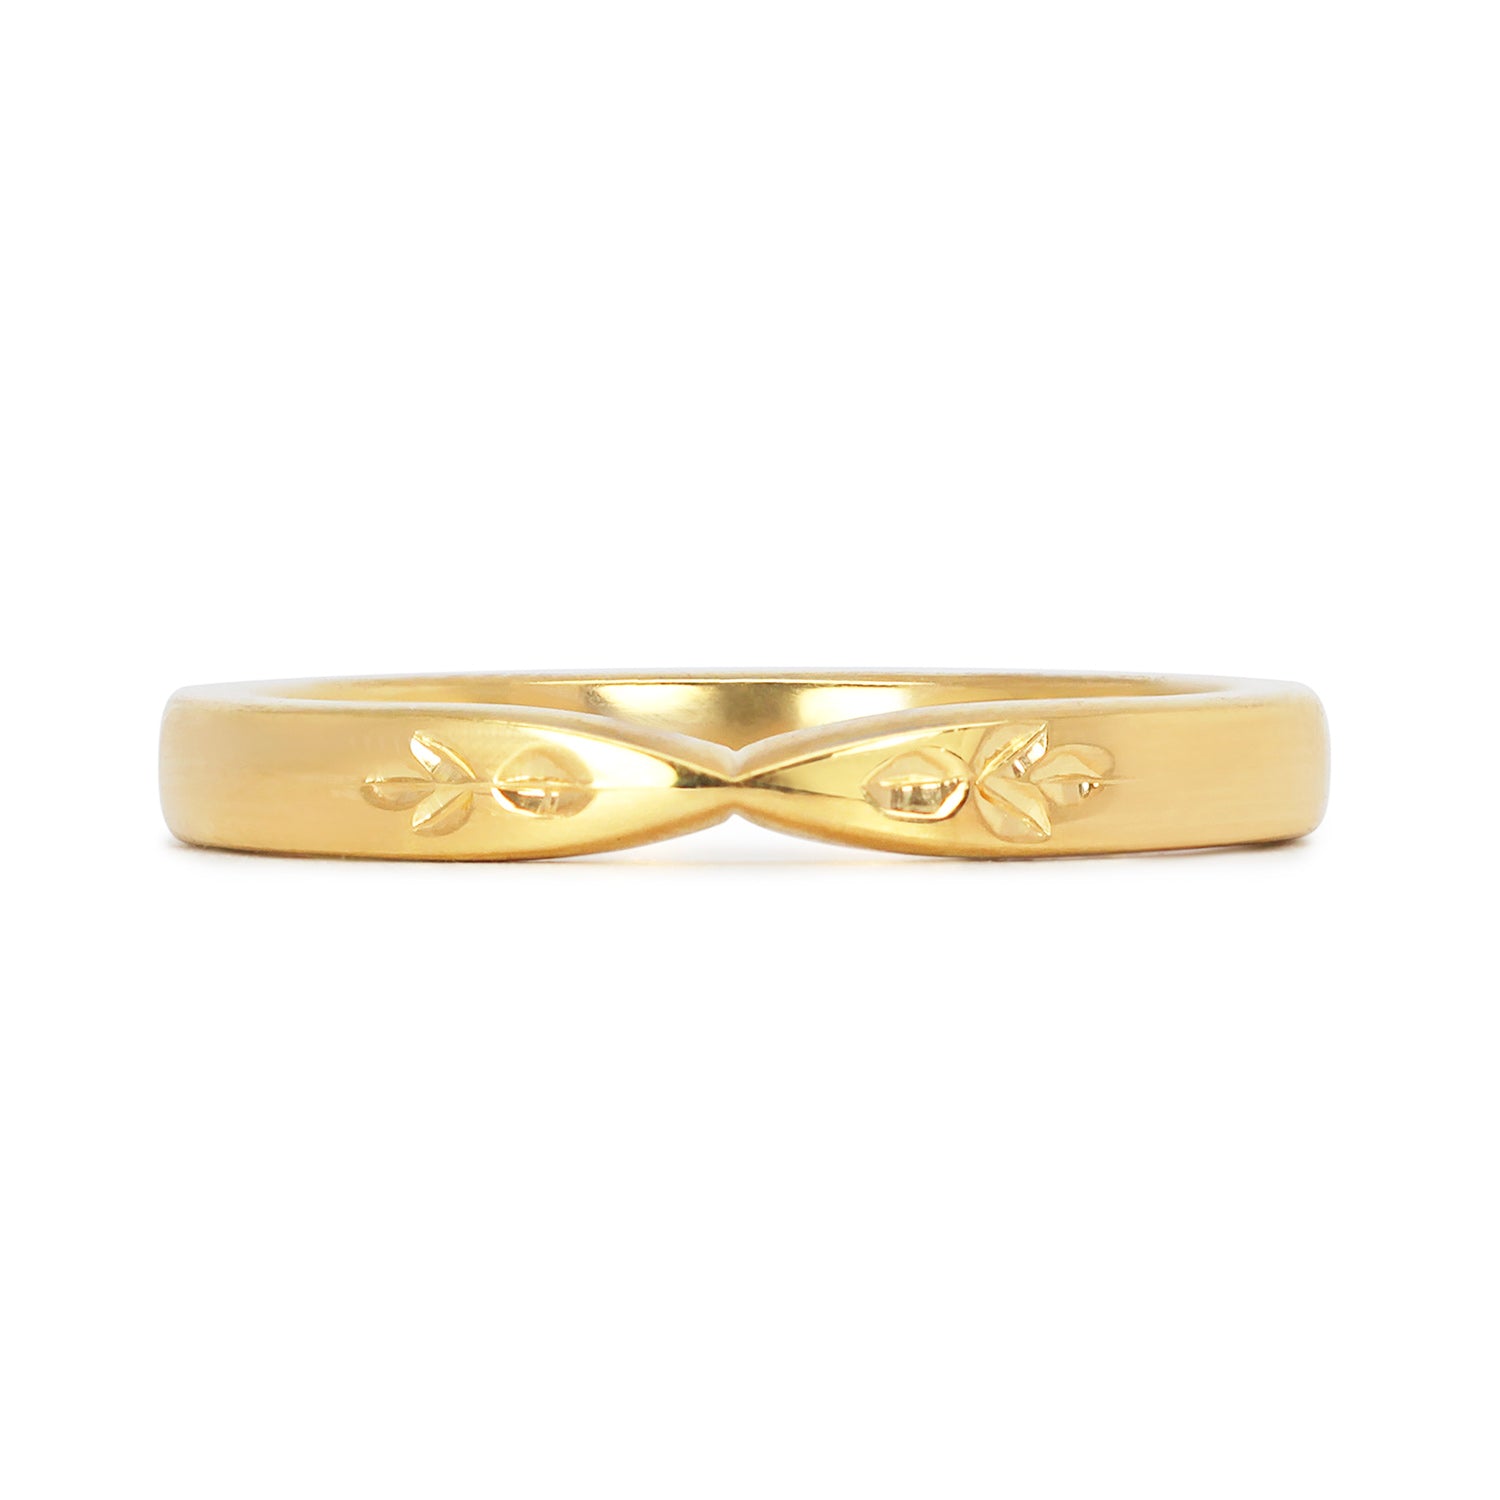 Lebrusan Studio vintage style shaped ethical wedding ring, hand-engraved with subtle flowers and cast in 18ct ethical recycled gold or Fairtrade Gold